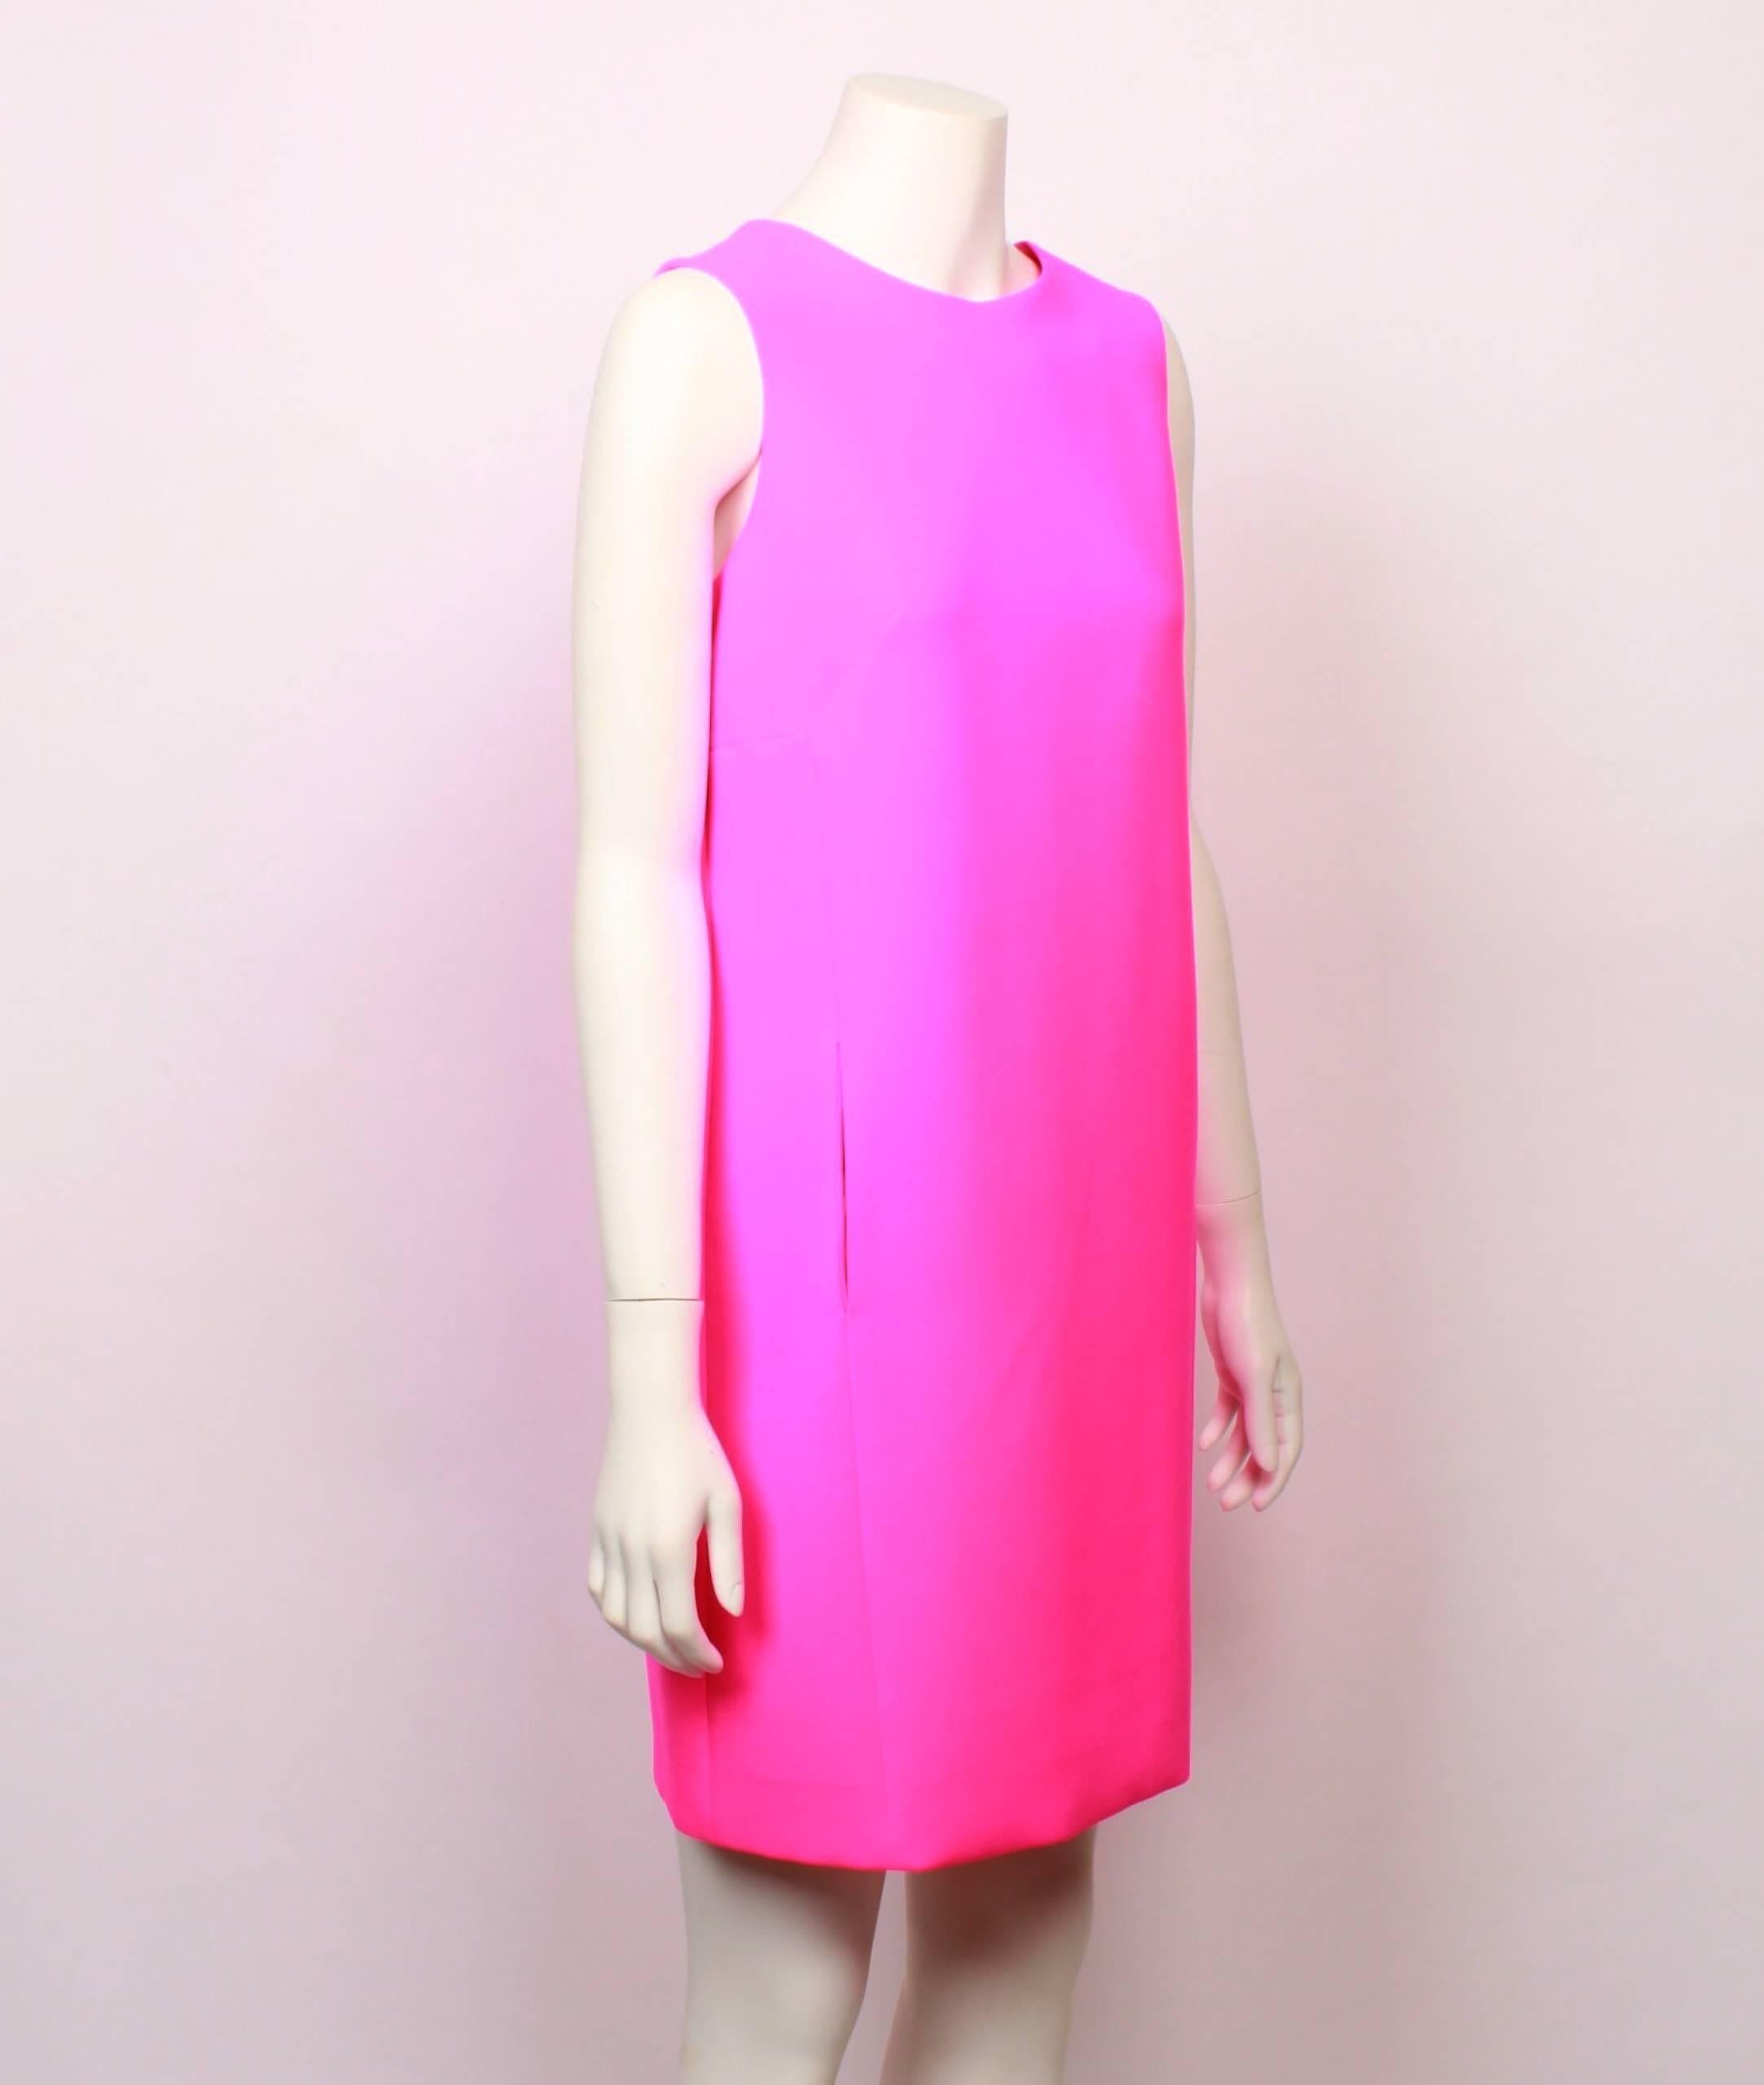 Retro style  Fendi shift mini dress in neon pink. Features in seam pockets, centre back inverted pleat and buttoned tab. Buttons are white with a gold rim. Invisible zipper closure. Fully lined. 
Made in Italy. Size M.